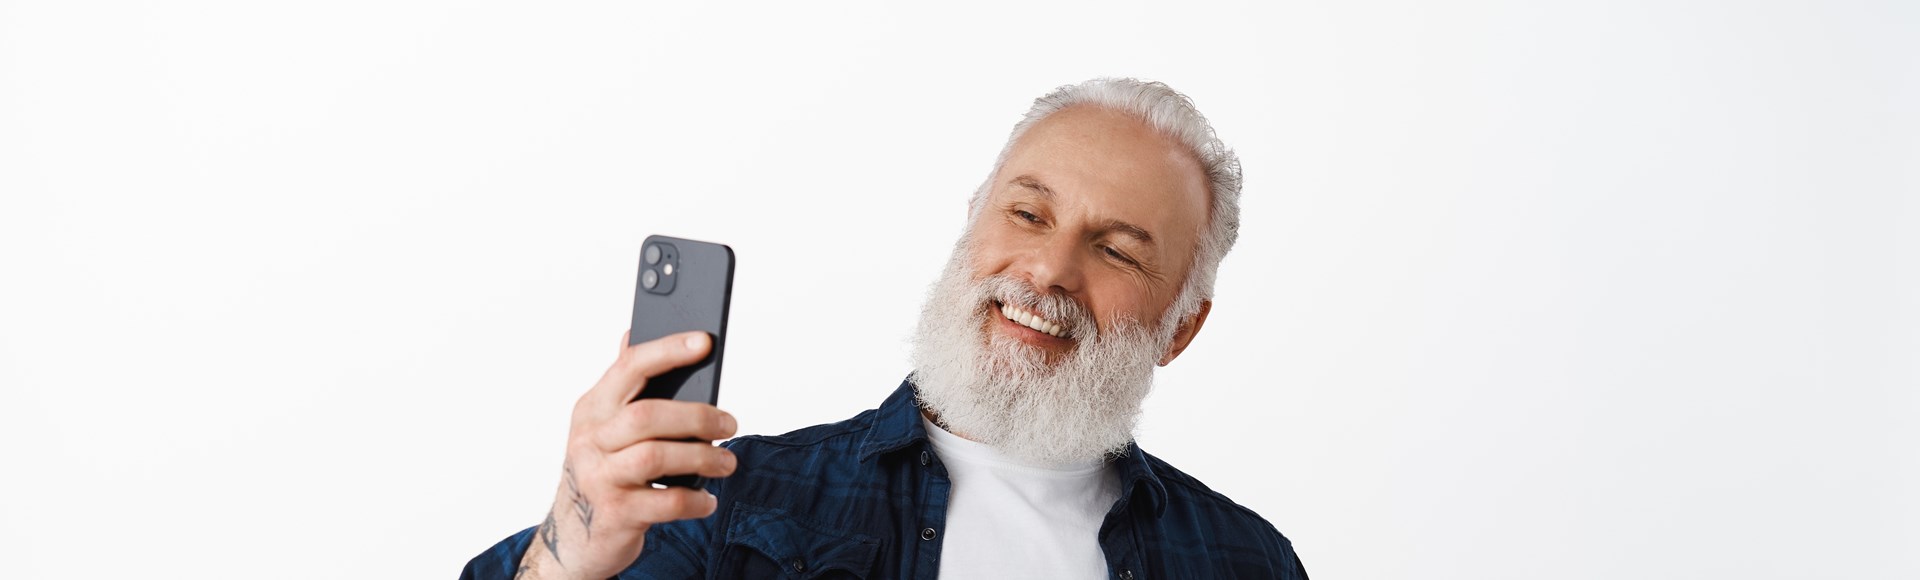 /media/tpojltng/happy-senior-man-taking-selfie-with-his-credit-card-smiling-as-paying-online-with-face-id-smartphone-app-shopping-internet-shop-standing-against-white-wall.jpg